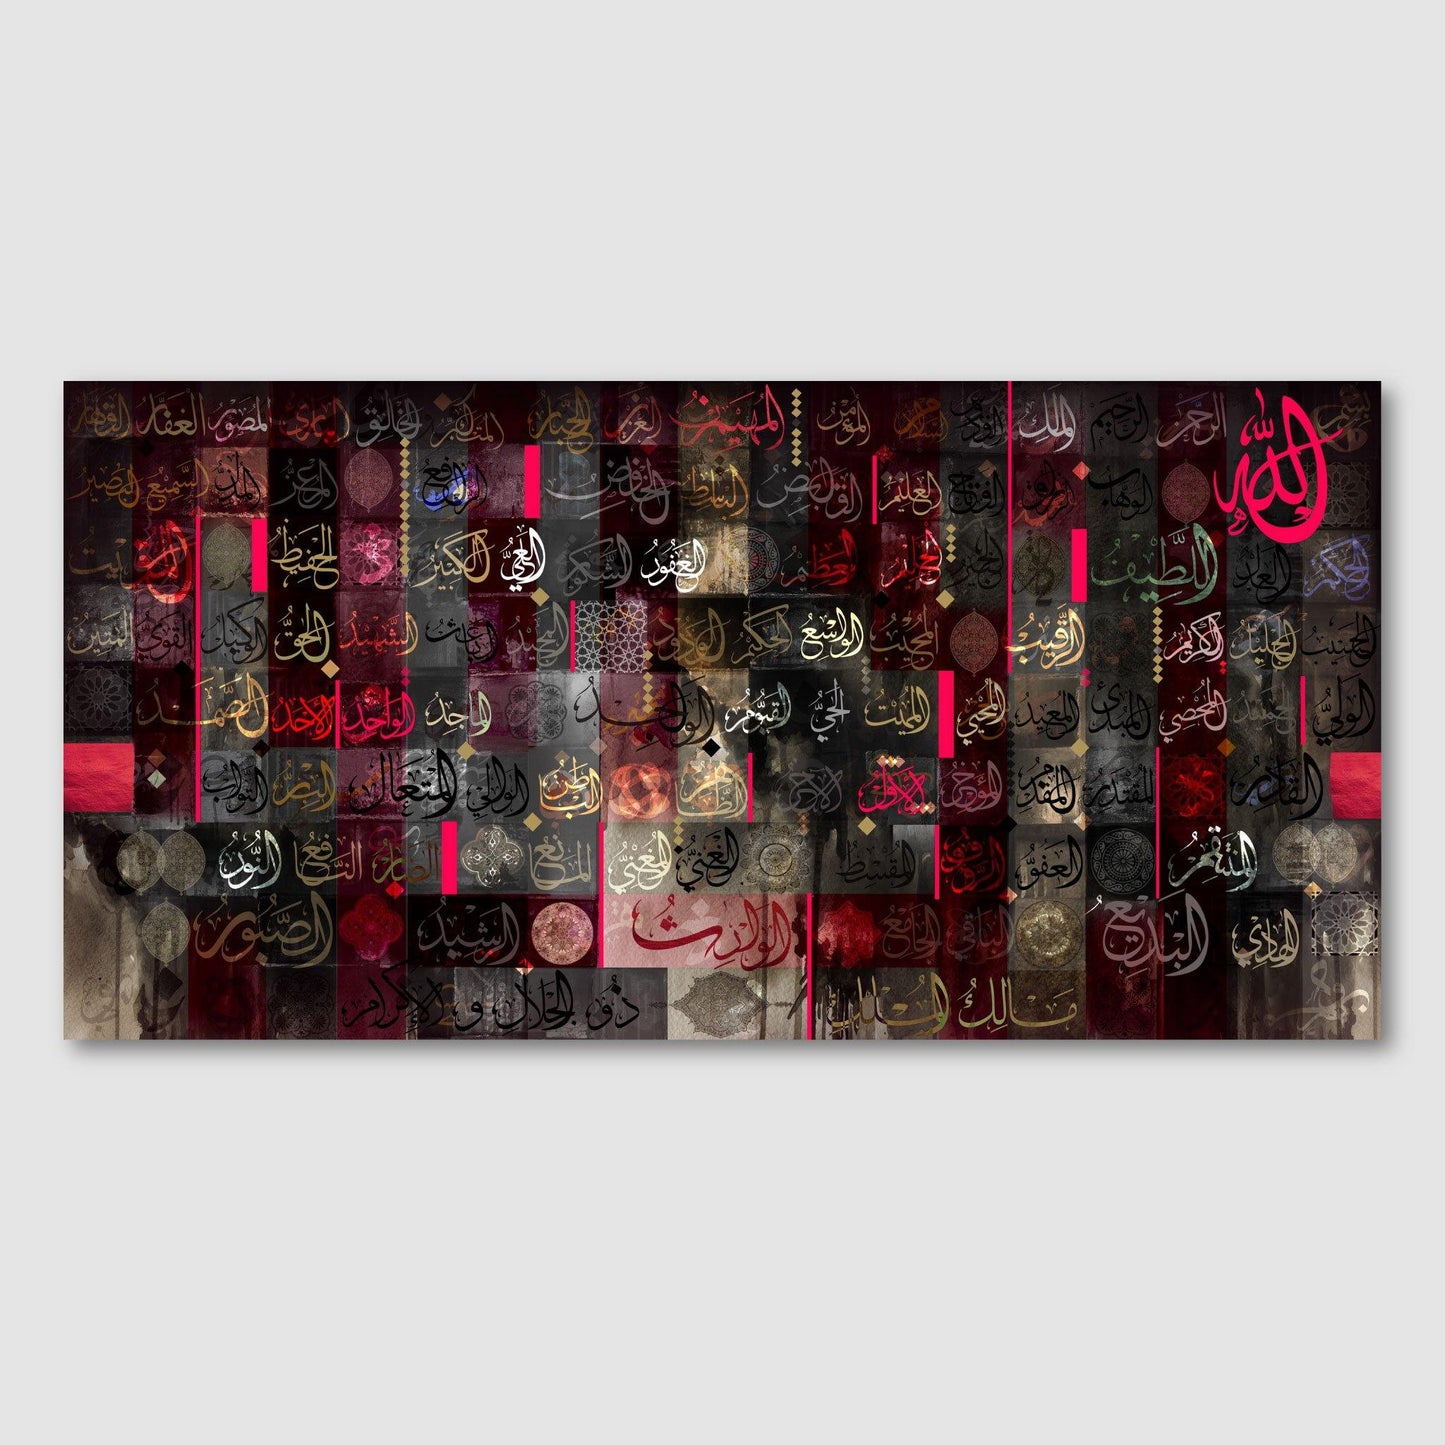 Ruby 99 Names of Allah - The Art Gallery Modern Arabic Calligraphy by Helen Abbas